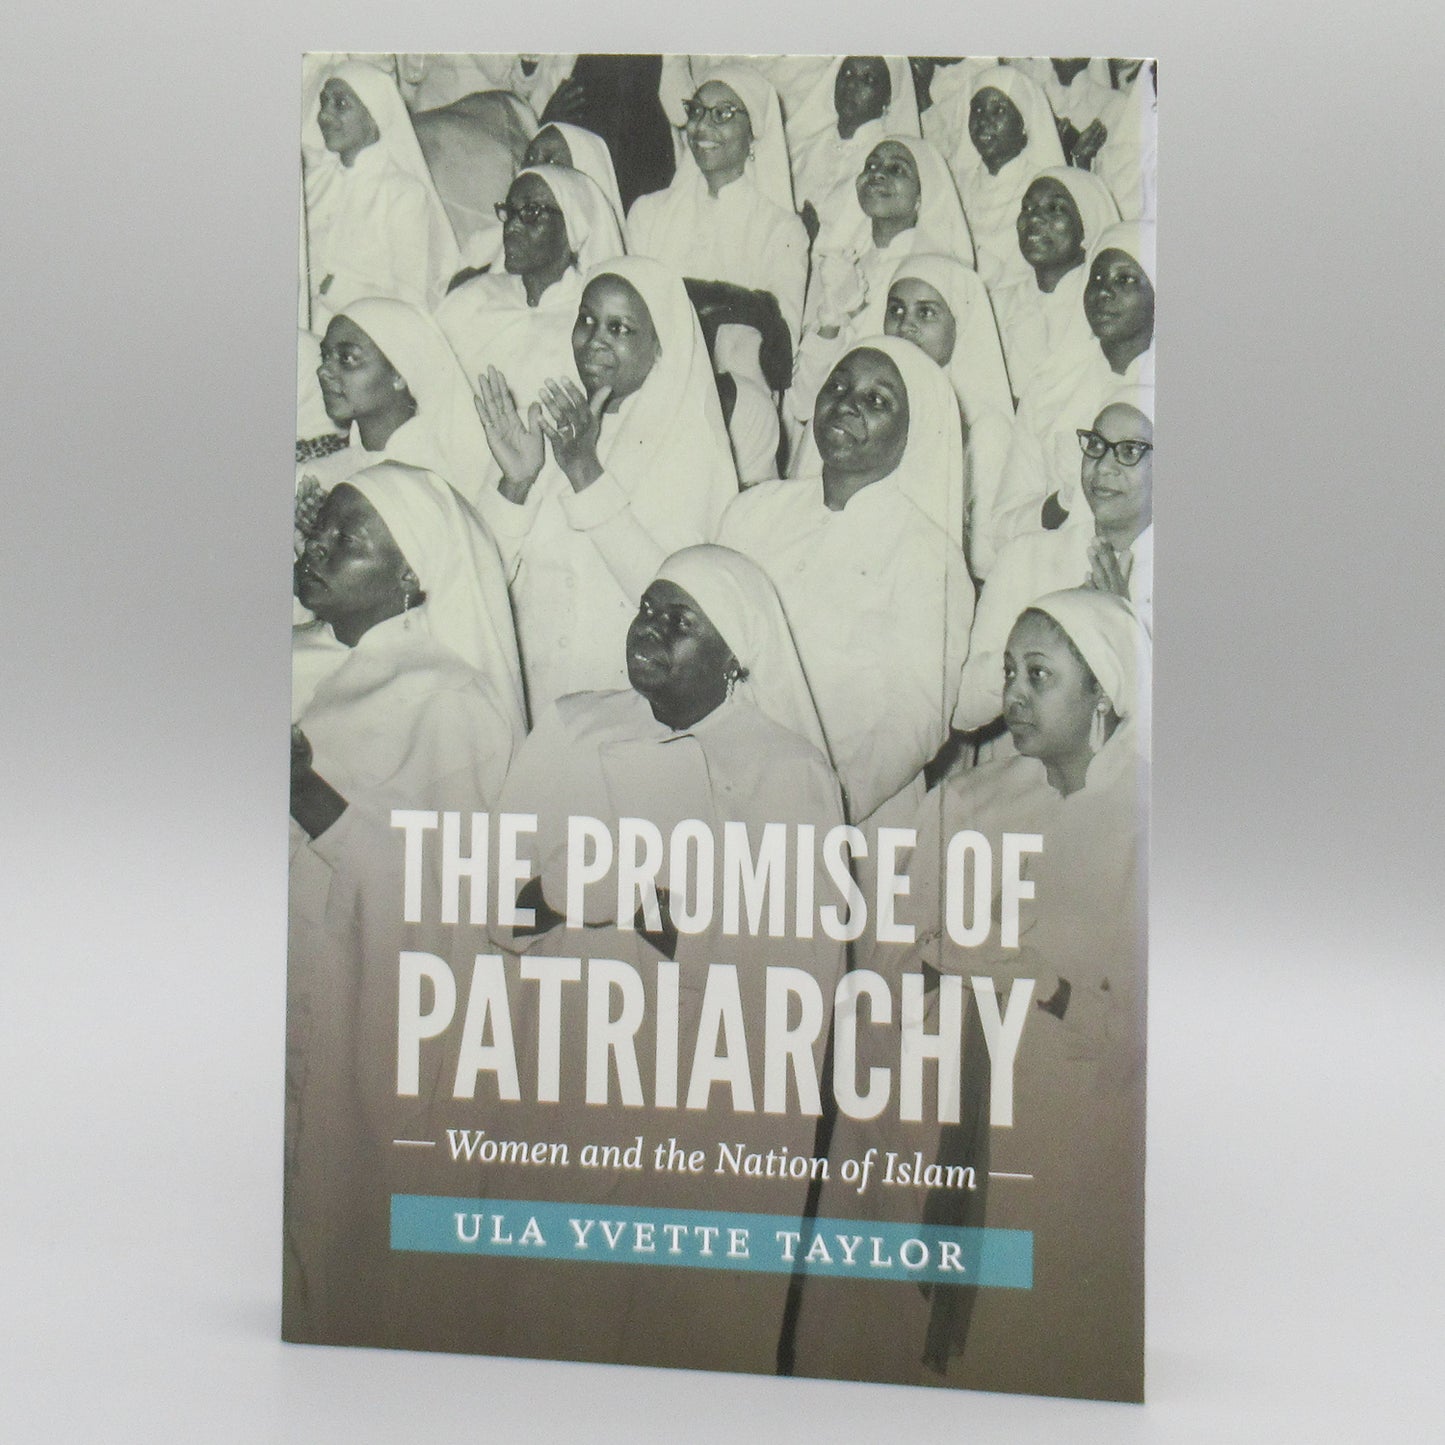 The Promise of Patriarchy: Women and the Nation of Islam